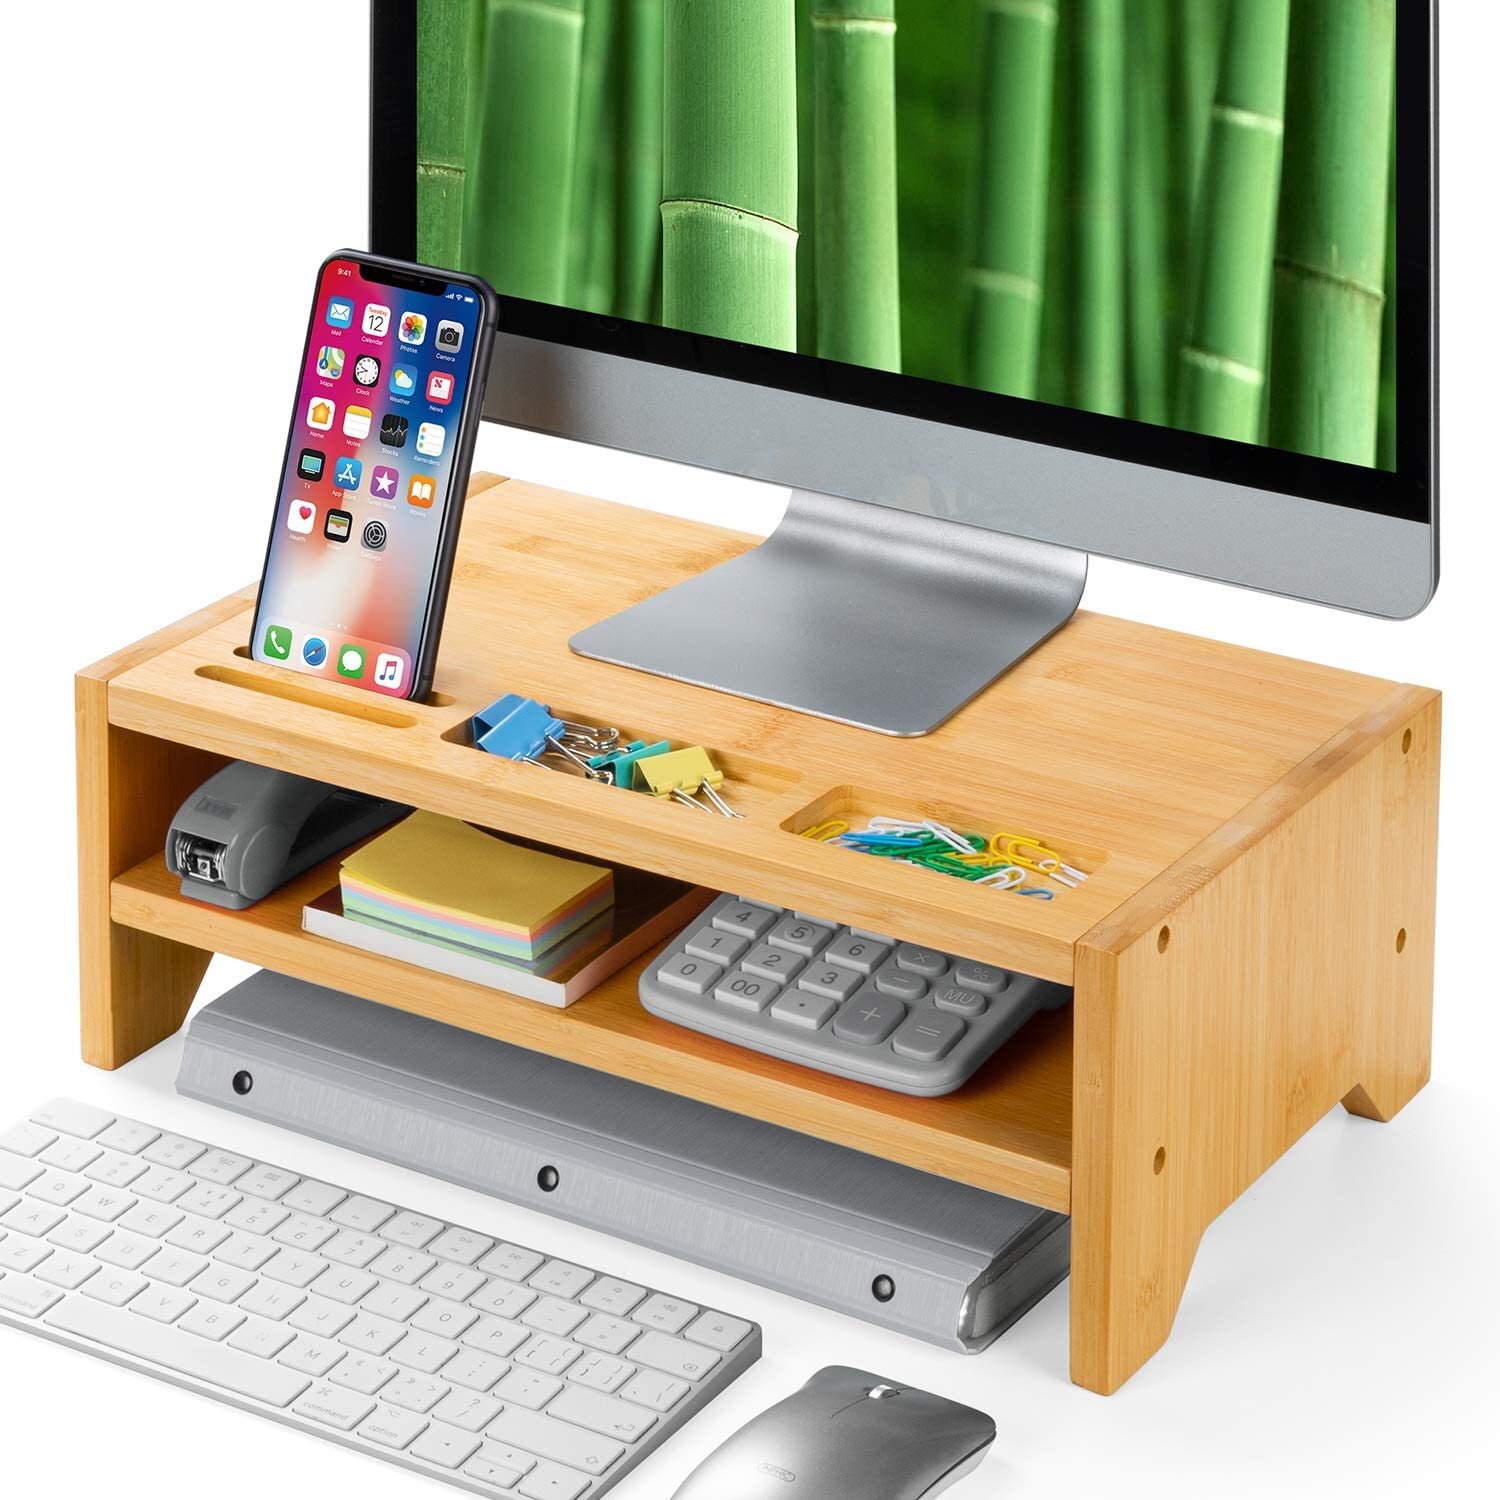  NOBLEWELL Computer Desk with Monitor Stand Storage